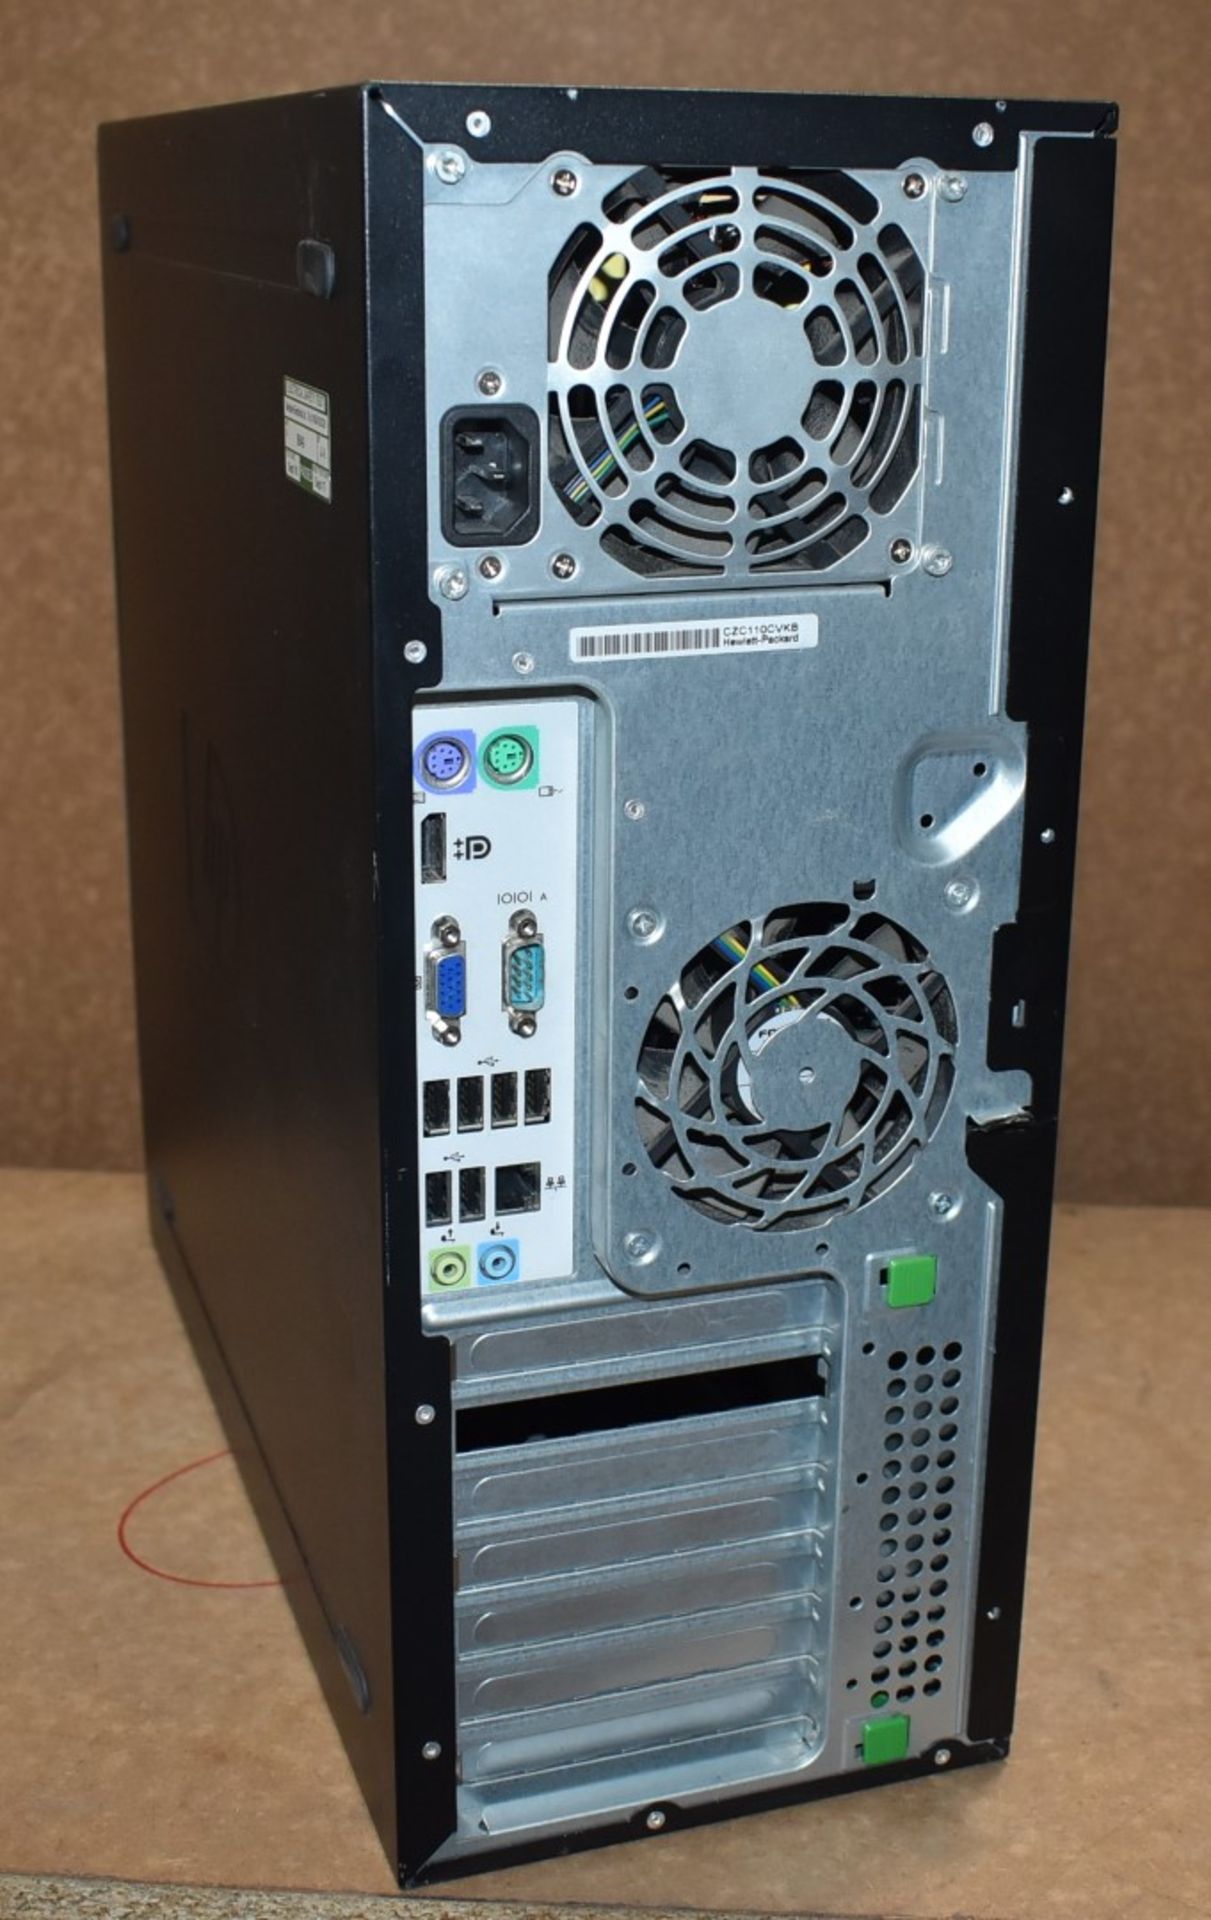 1 x HP Compaq 8100 Elite Mini Tower Desktop PC - Features an Intel i7 Processor and 4gb Ram - Spares - Image 4 of 5